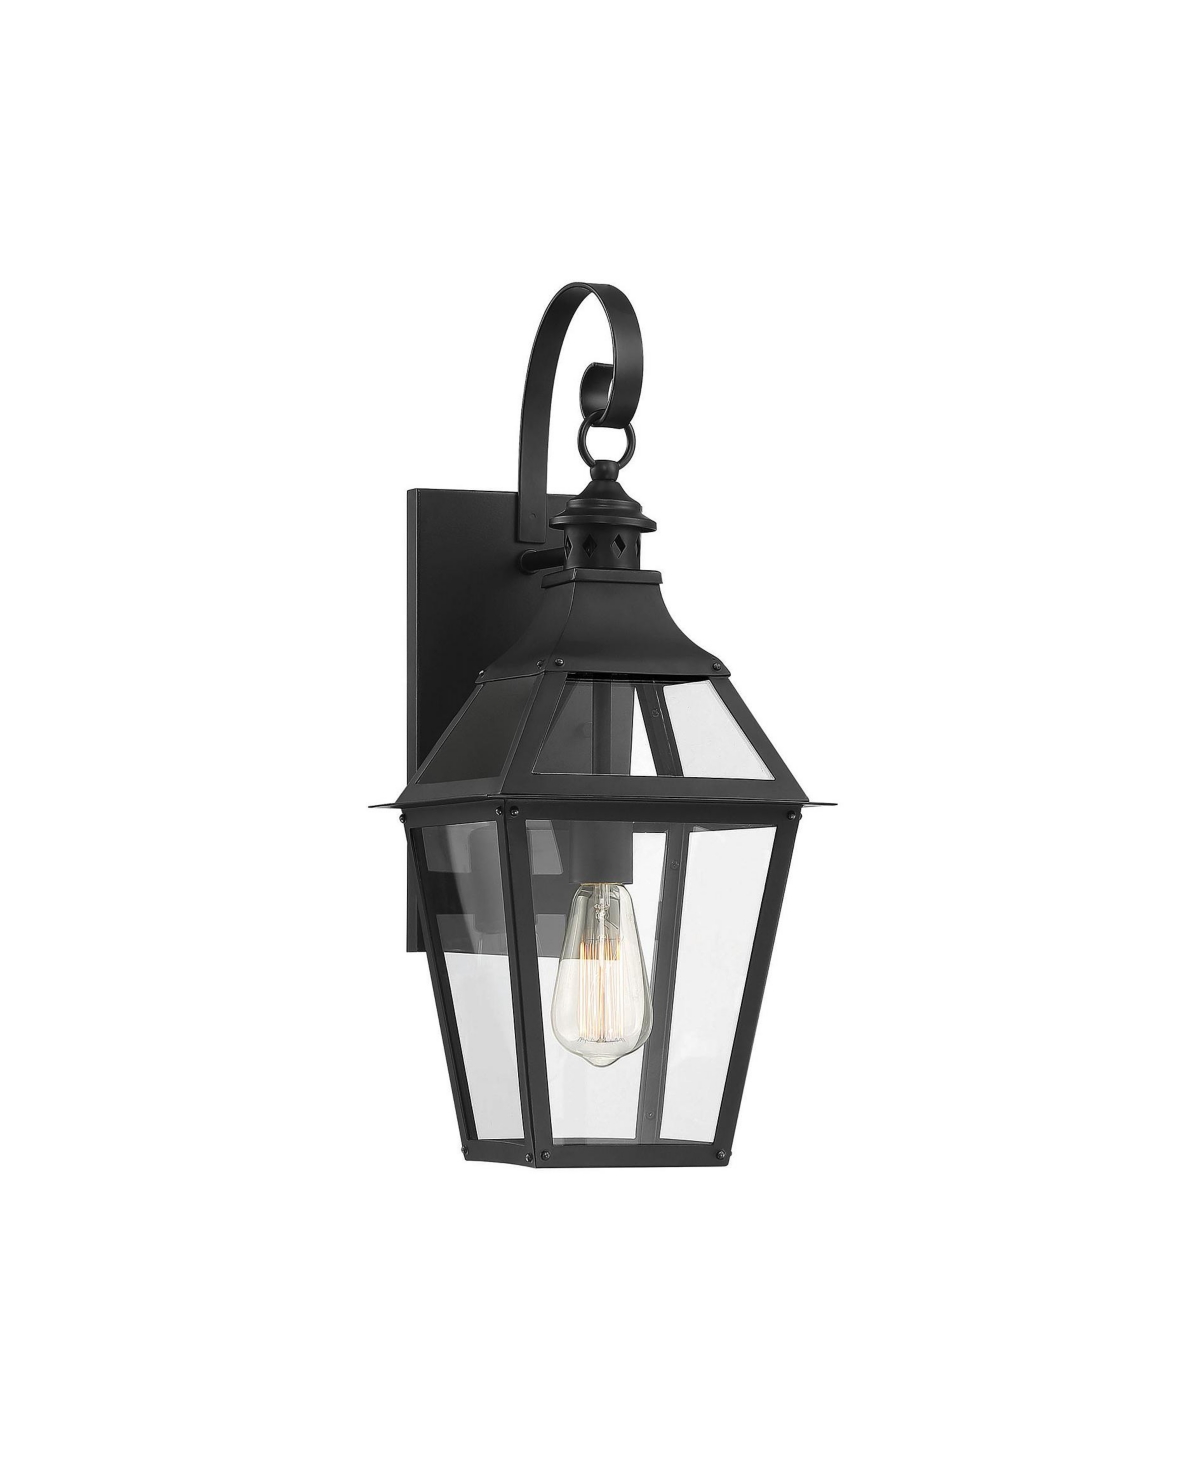 Jackson 1-Light Outdoor Wall Lantern in Matte Black with Gold Highlights - Black/gold highlighted